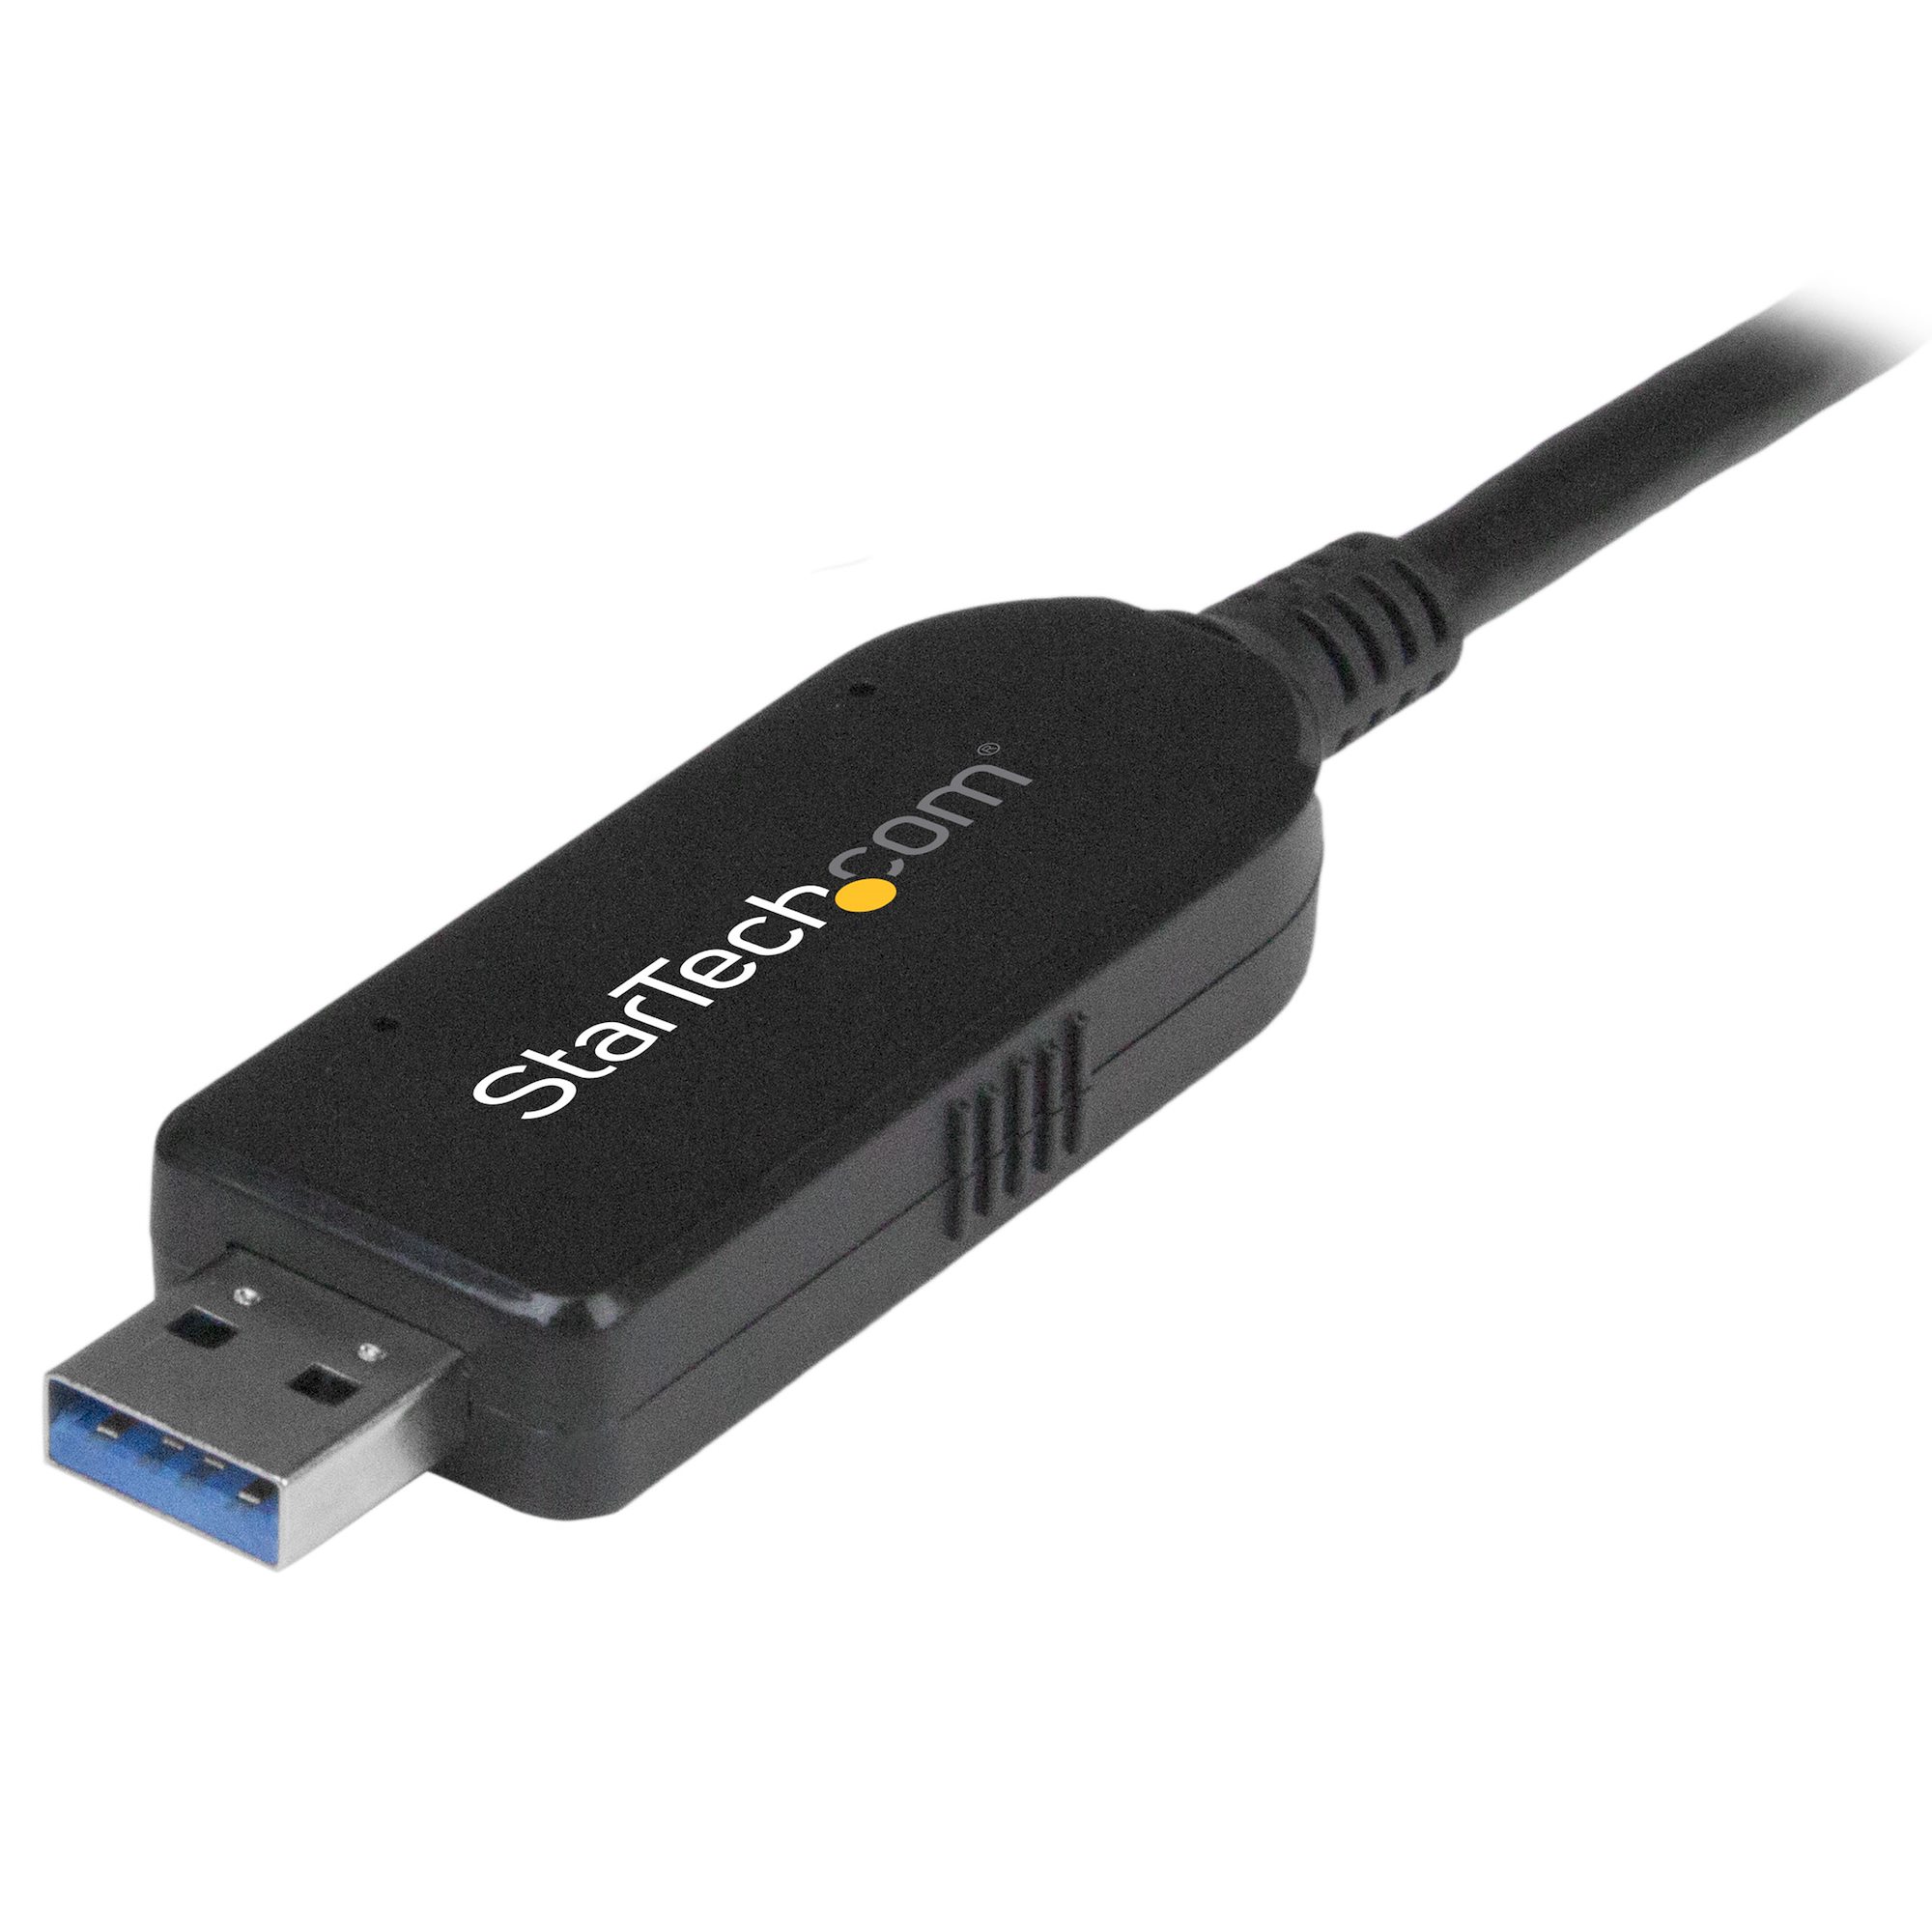 USB Data Transfer Cable for Mac & PC USB & Devices | StarTech.com